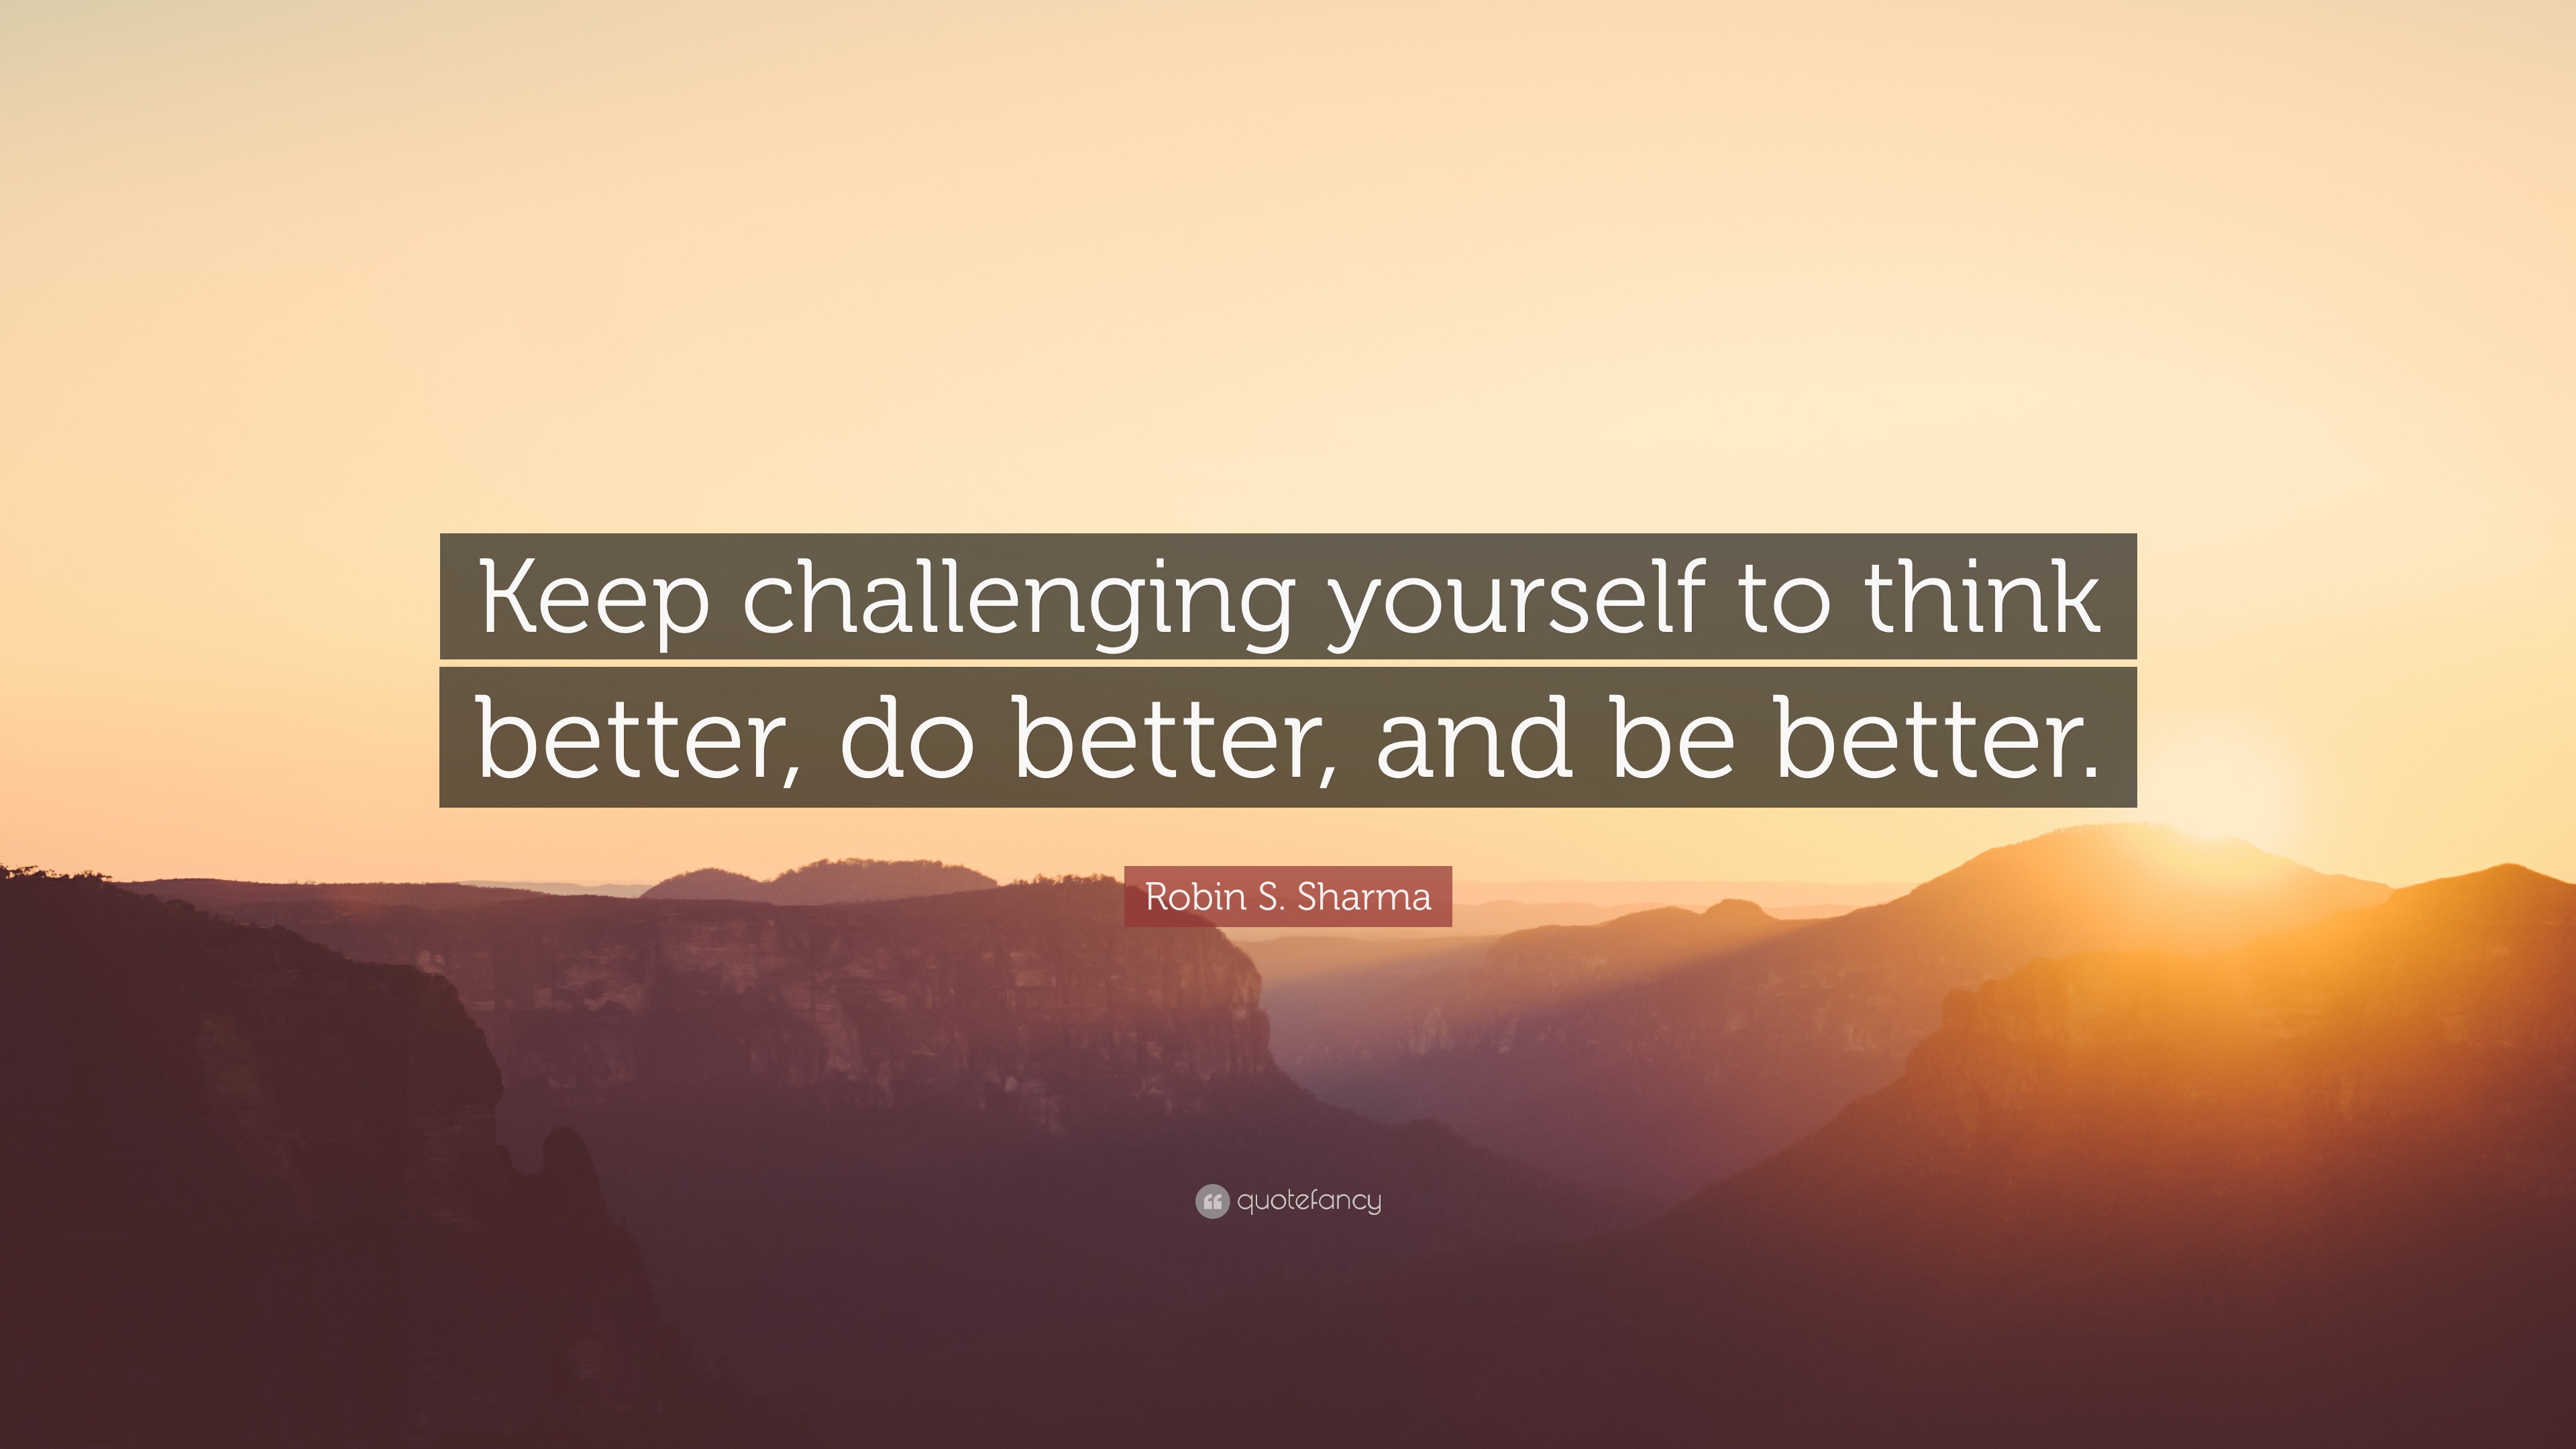 Robin S. Sharma Quote: “Keep challenging yourself to think better, do ...